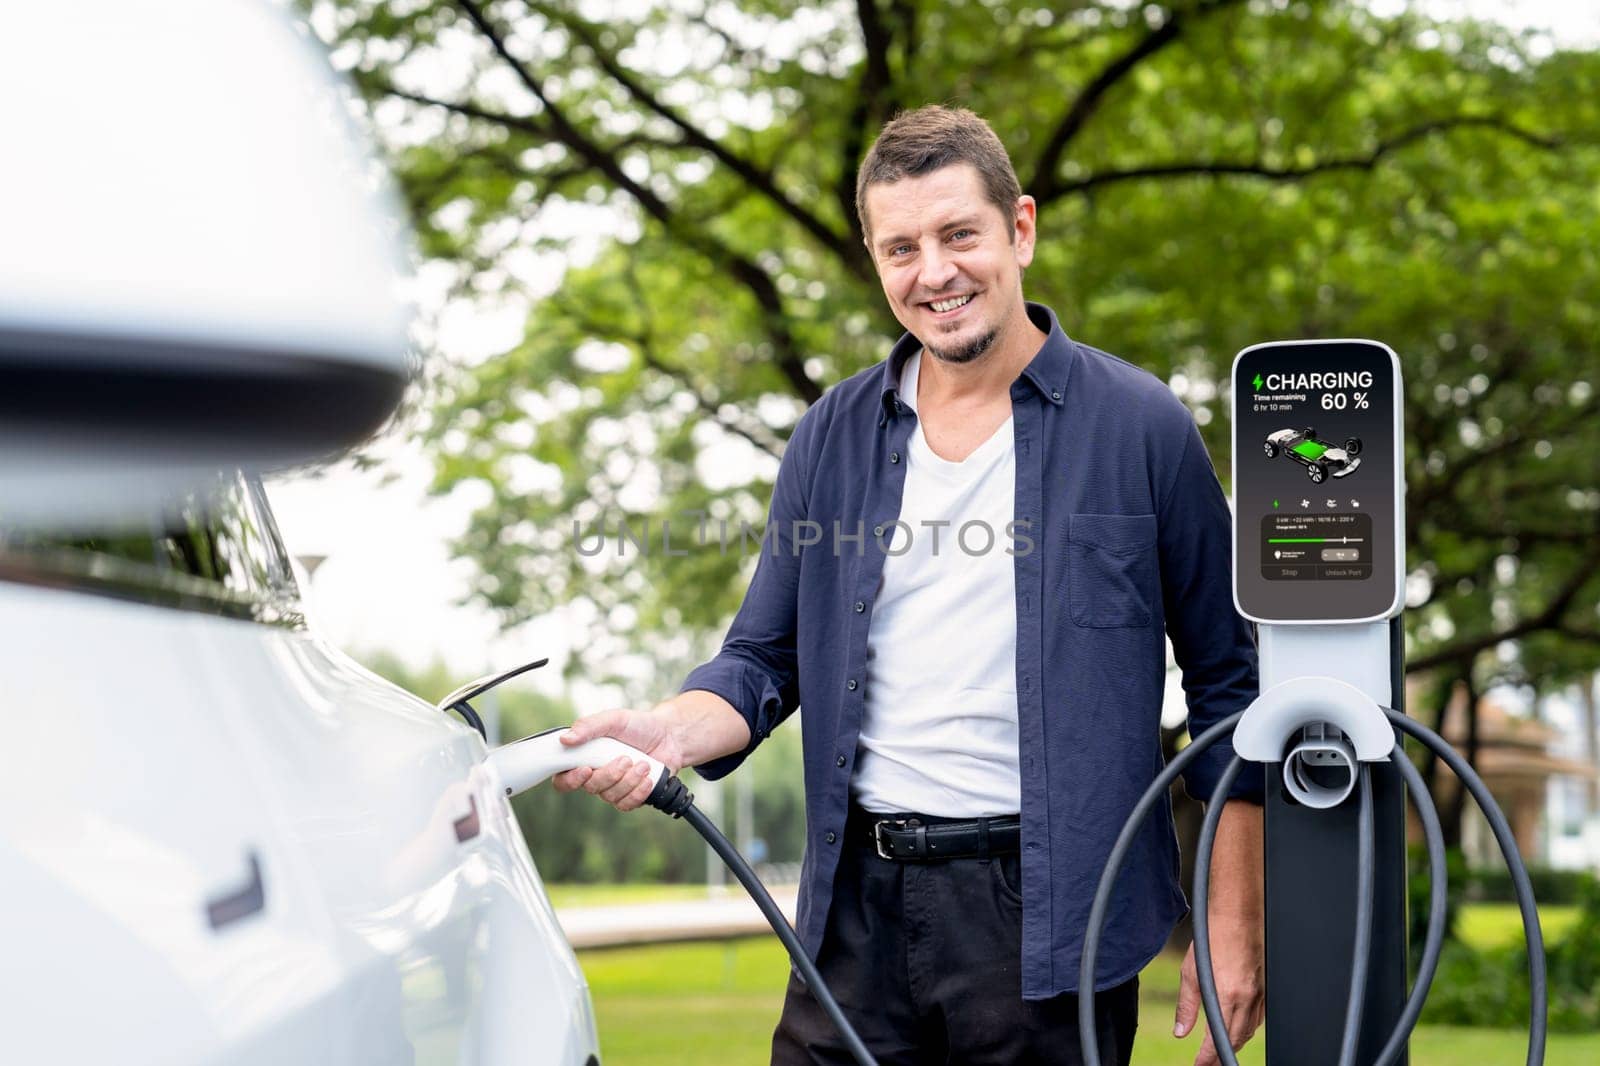 Man recharge EV electric vehicle's battery from EV charging station in outdoor green city park scenic. Eco friendly urban transport and commute with eco friendly EV car travel. Exalt